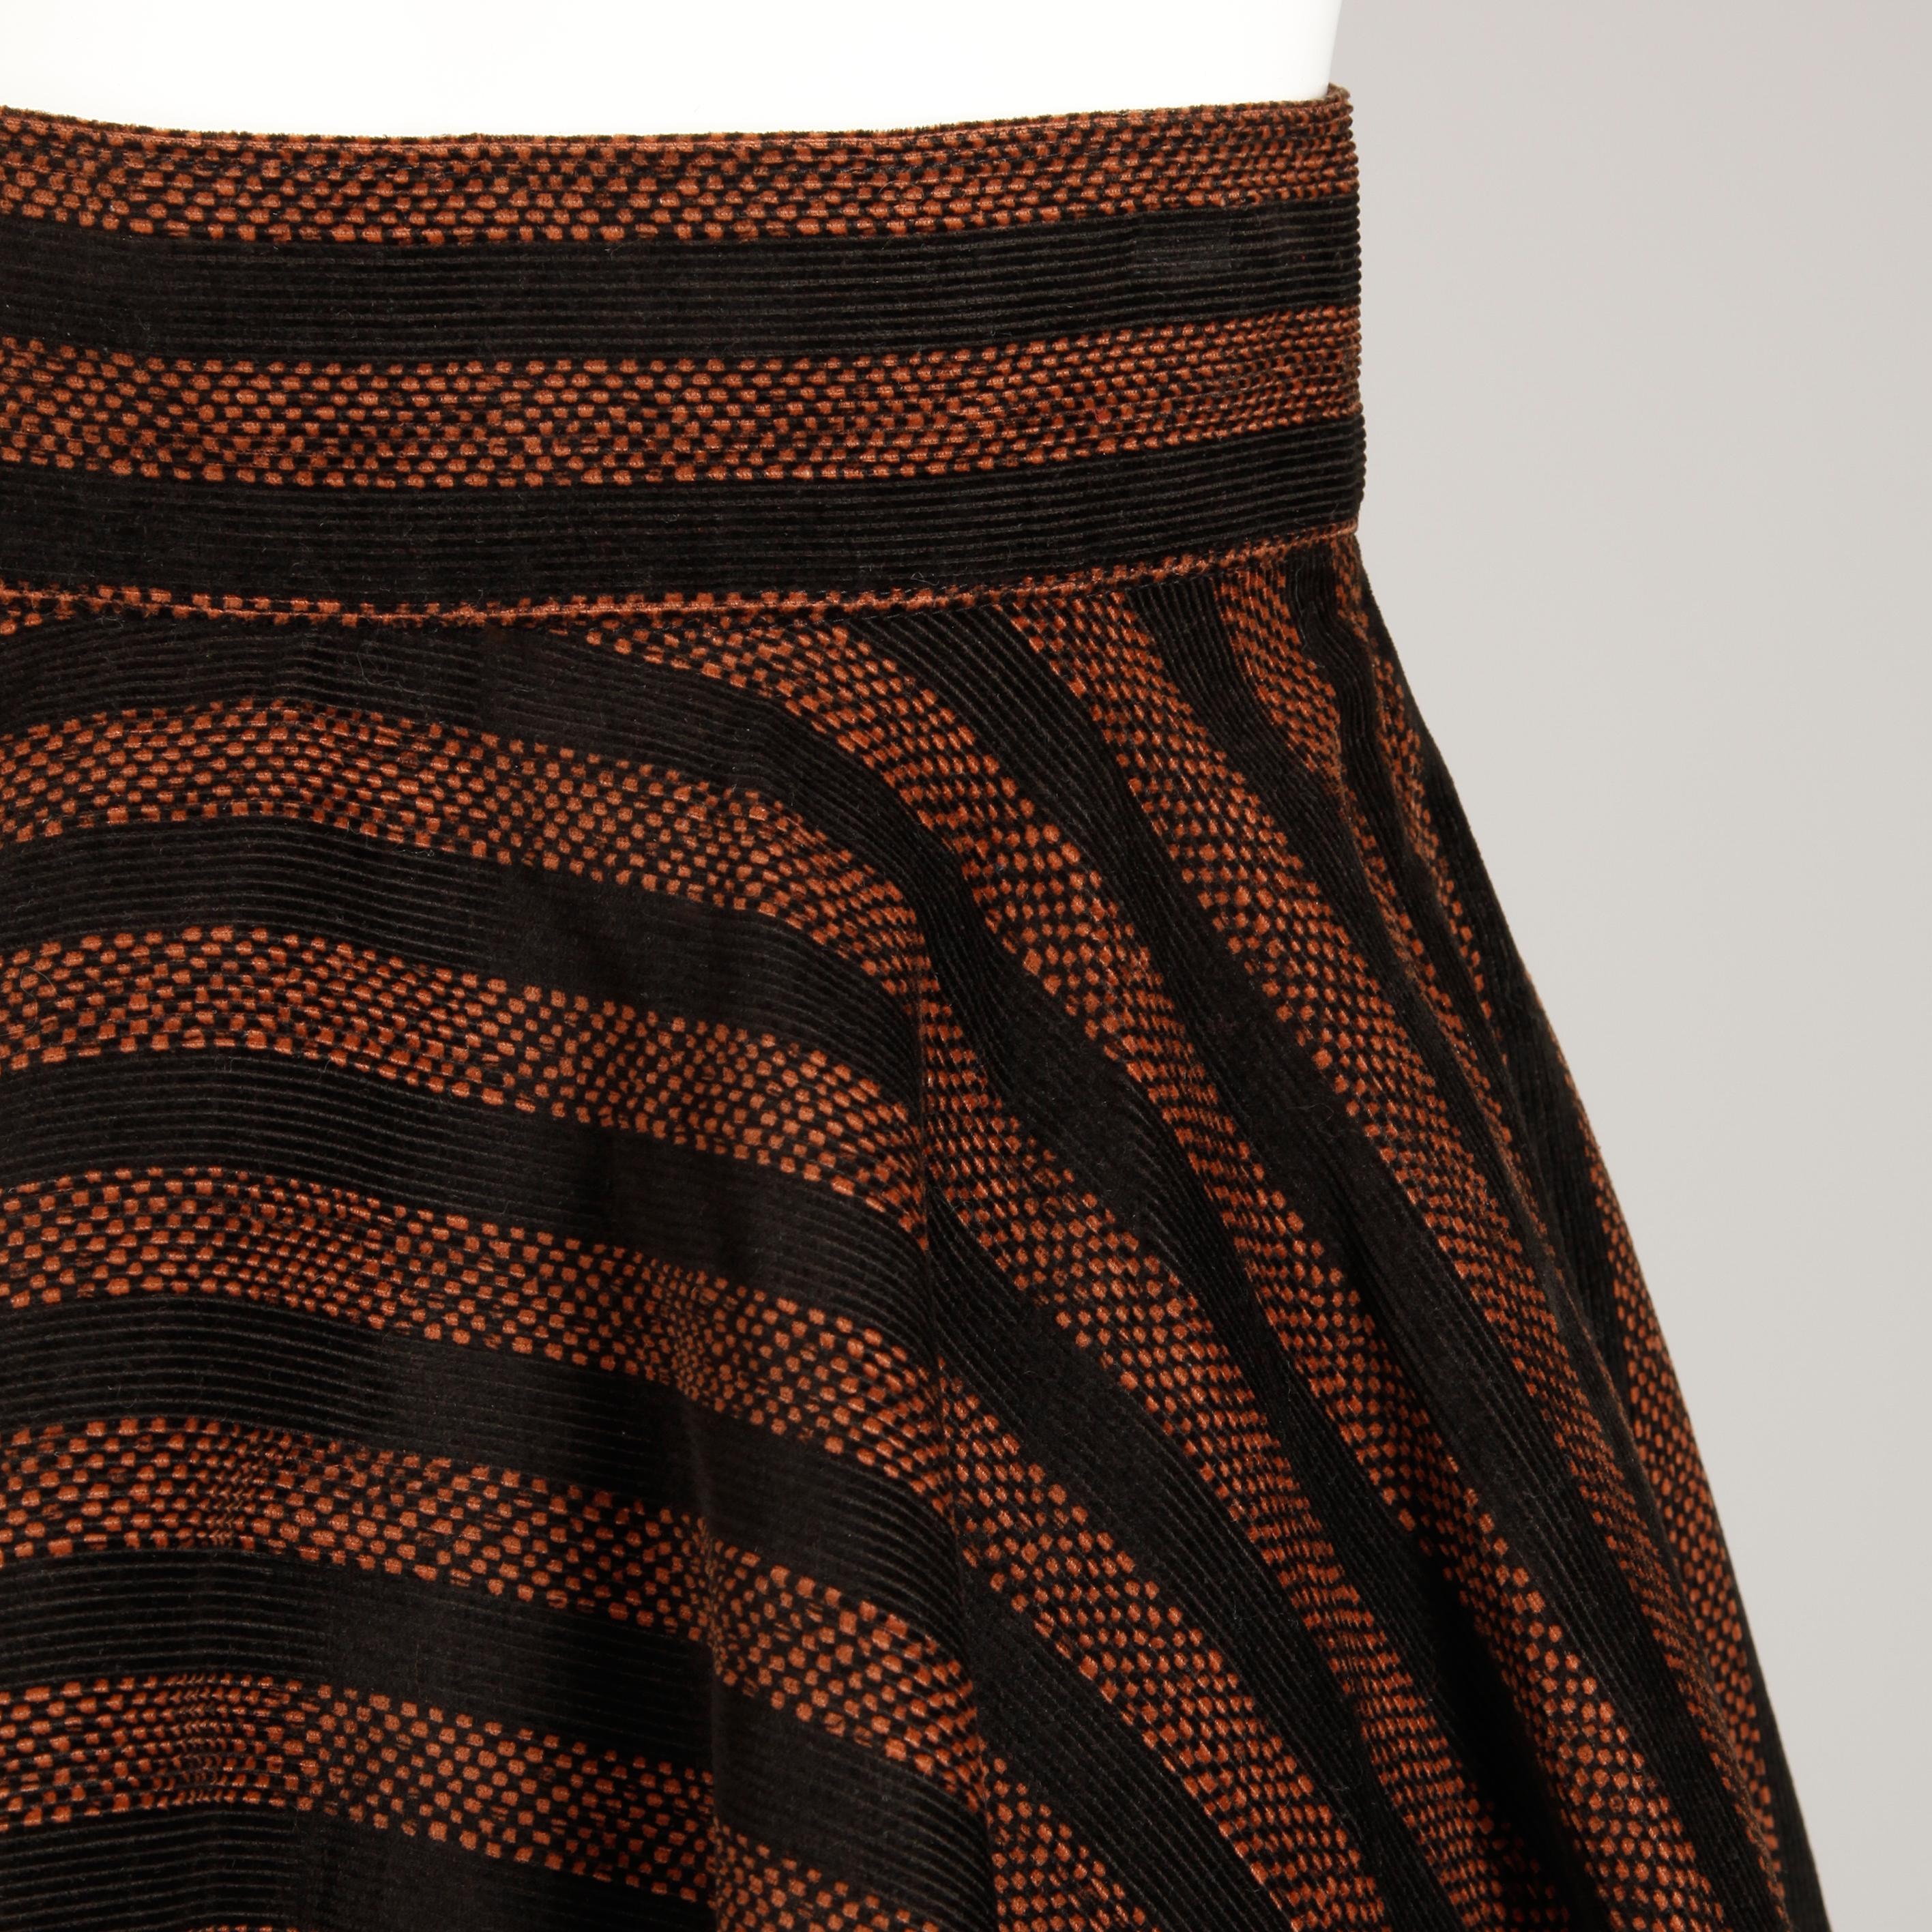 1950s Brown + Black Striped Circle Skirt with a Full Sweep In Excellent Condition For Sale In Sparks, NV